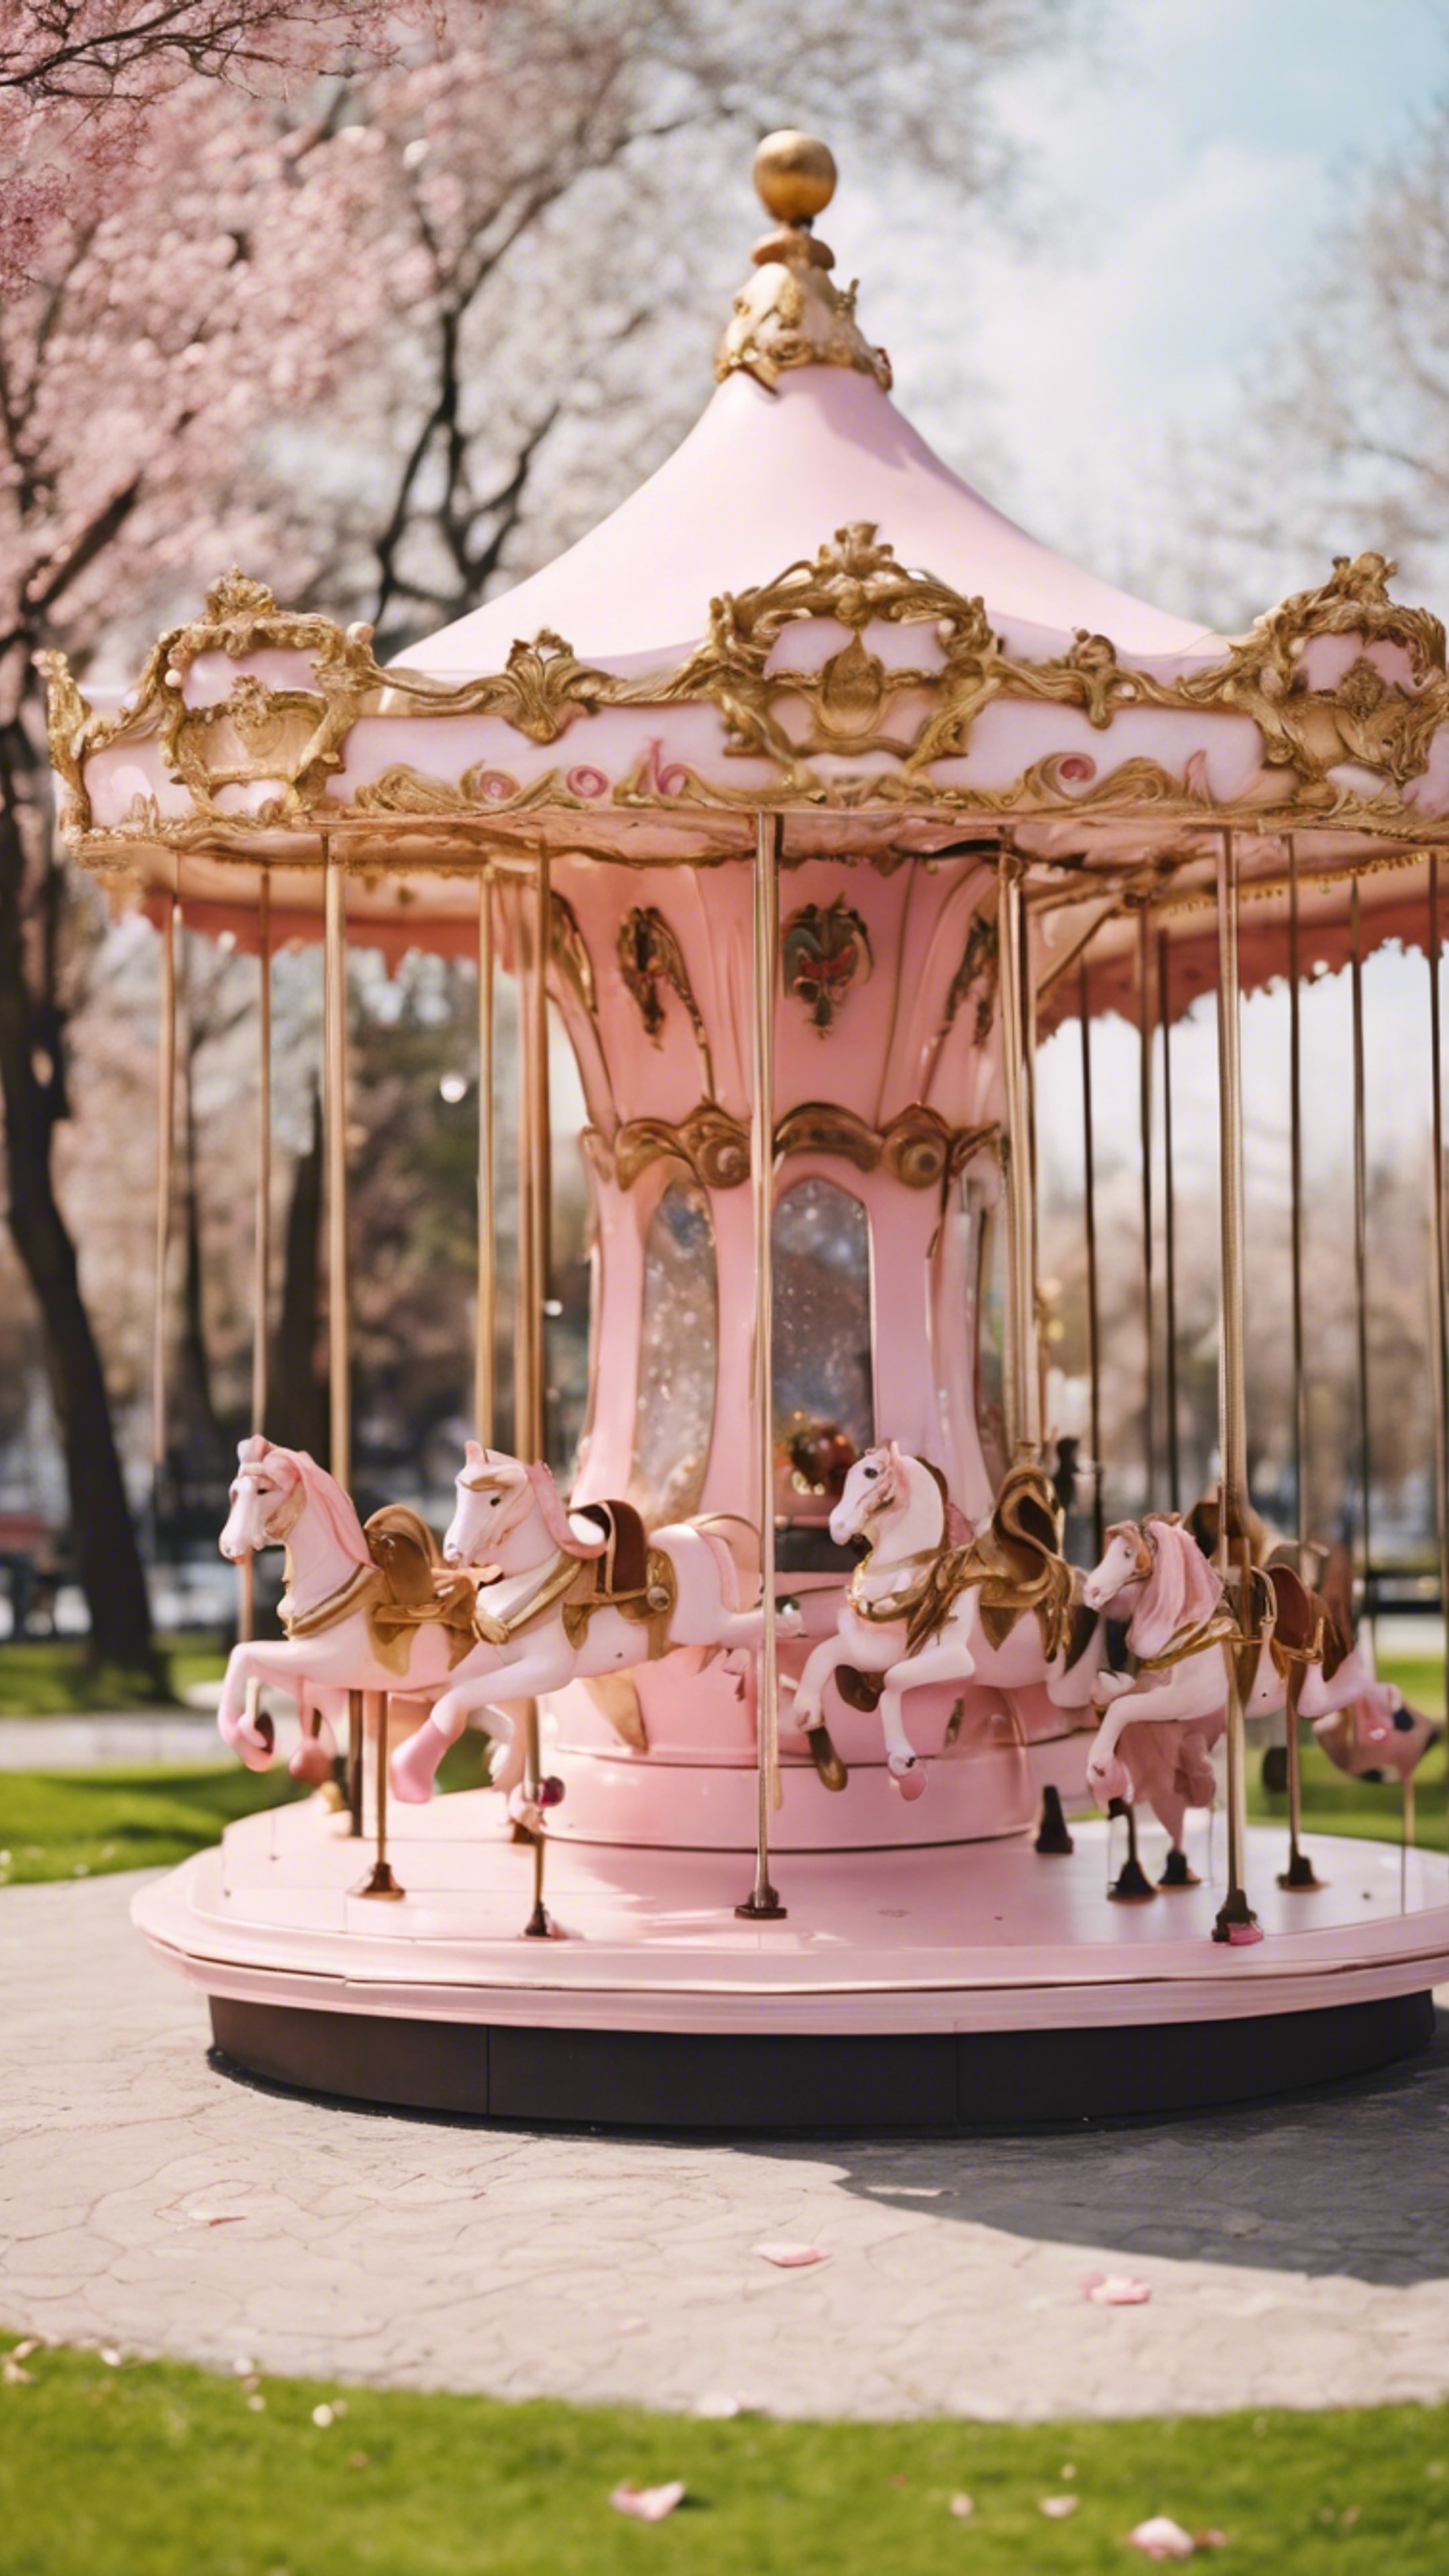 A whimsical pink marble carousel in a serene park, waiting for the children to play on. Wallpaper[aae944bb72134eed9872]